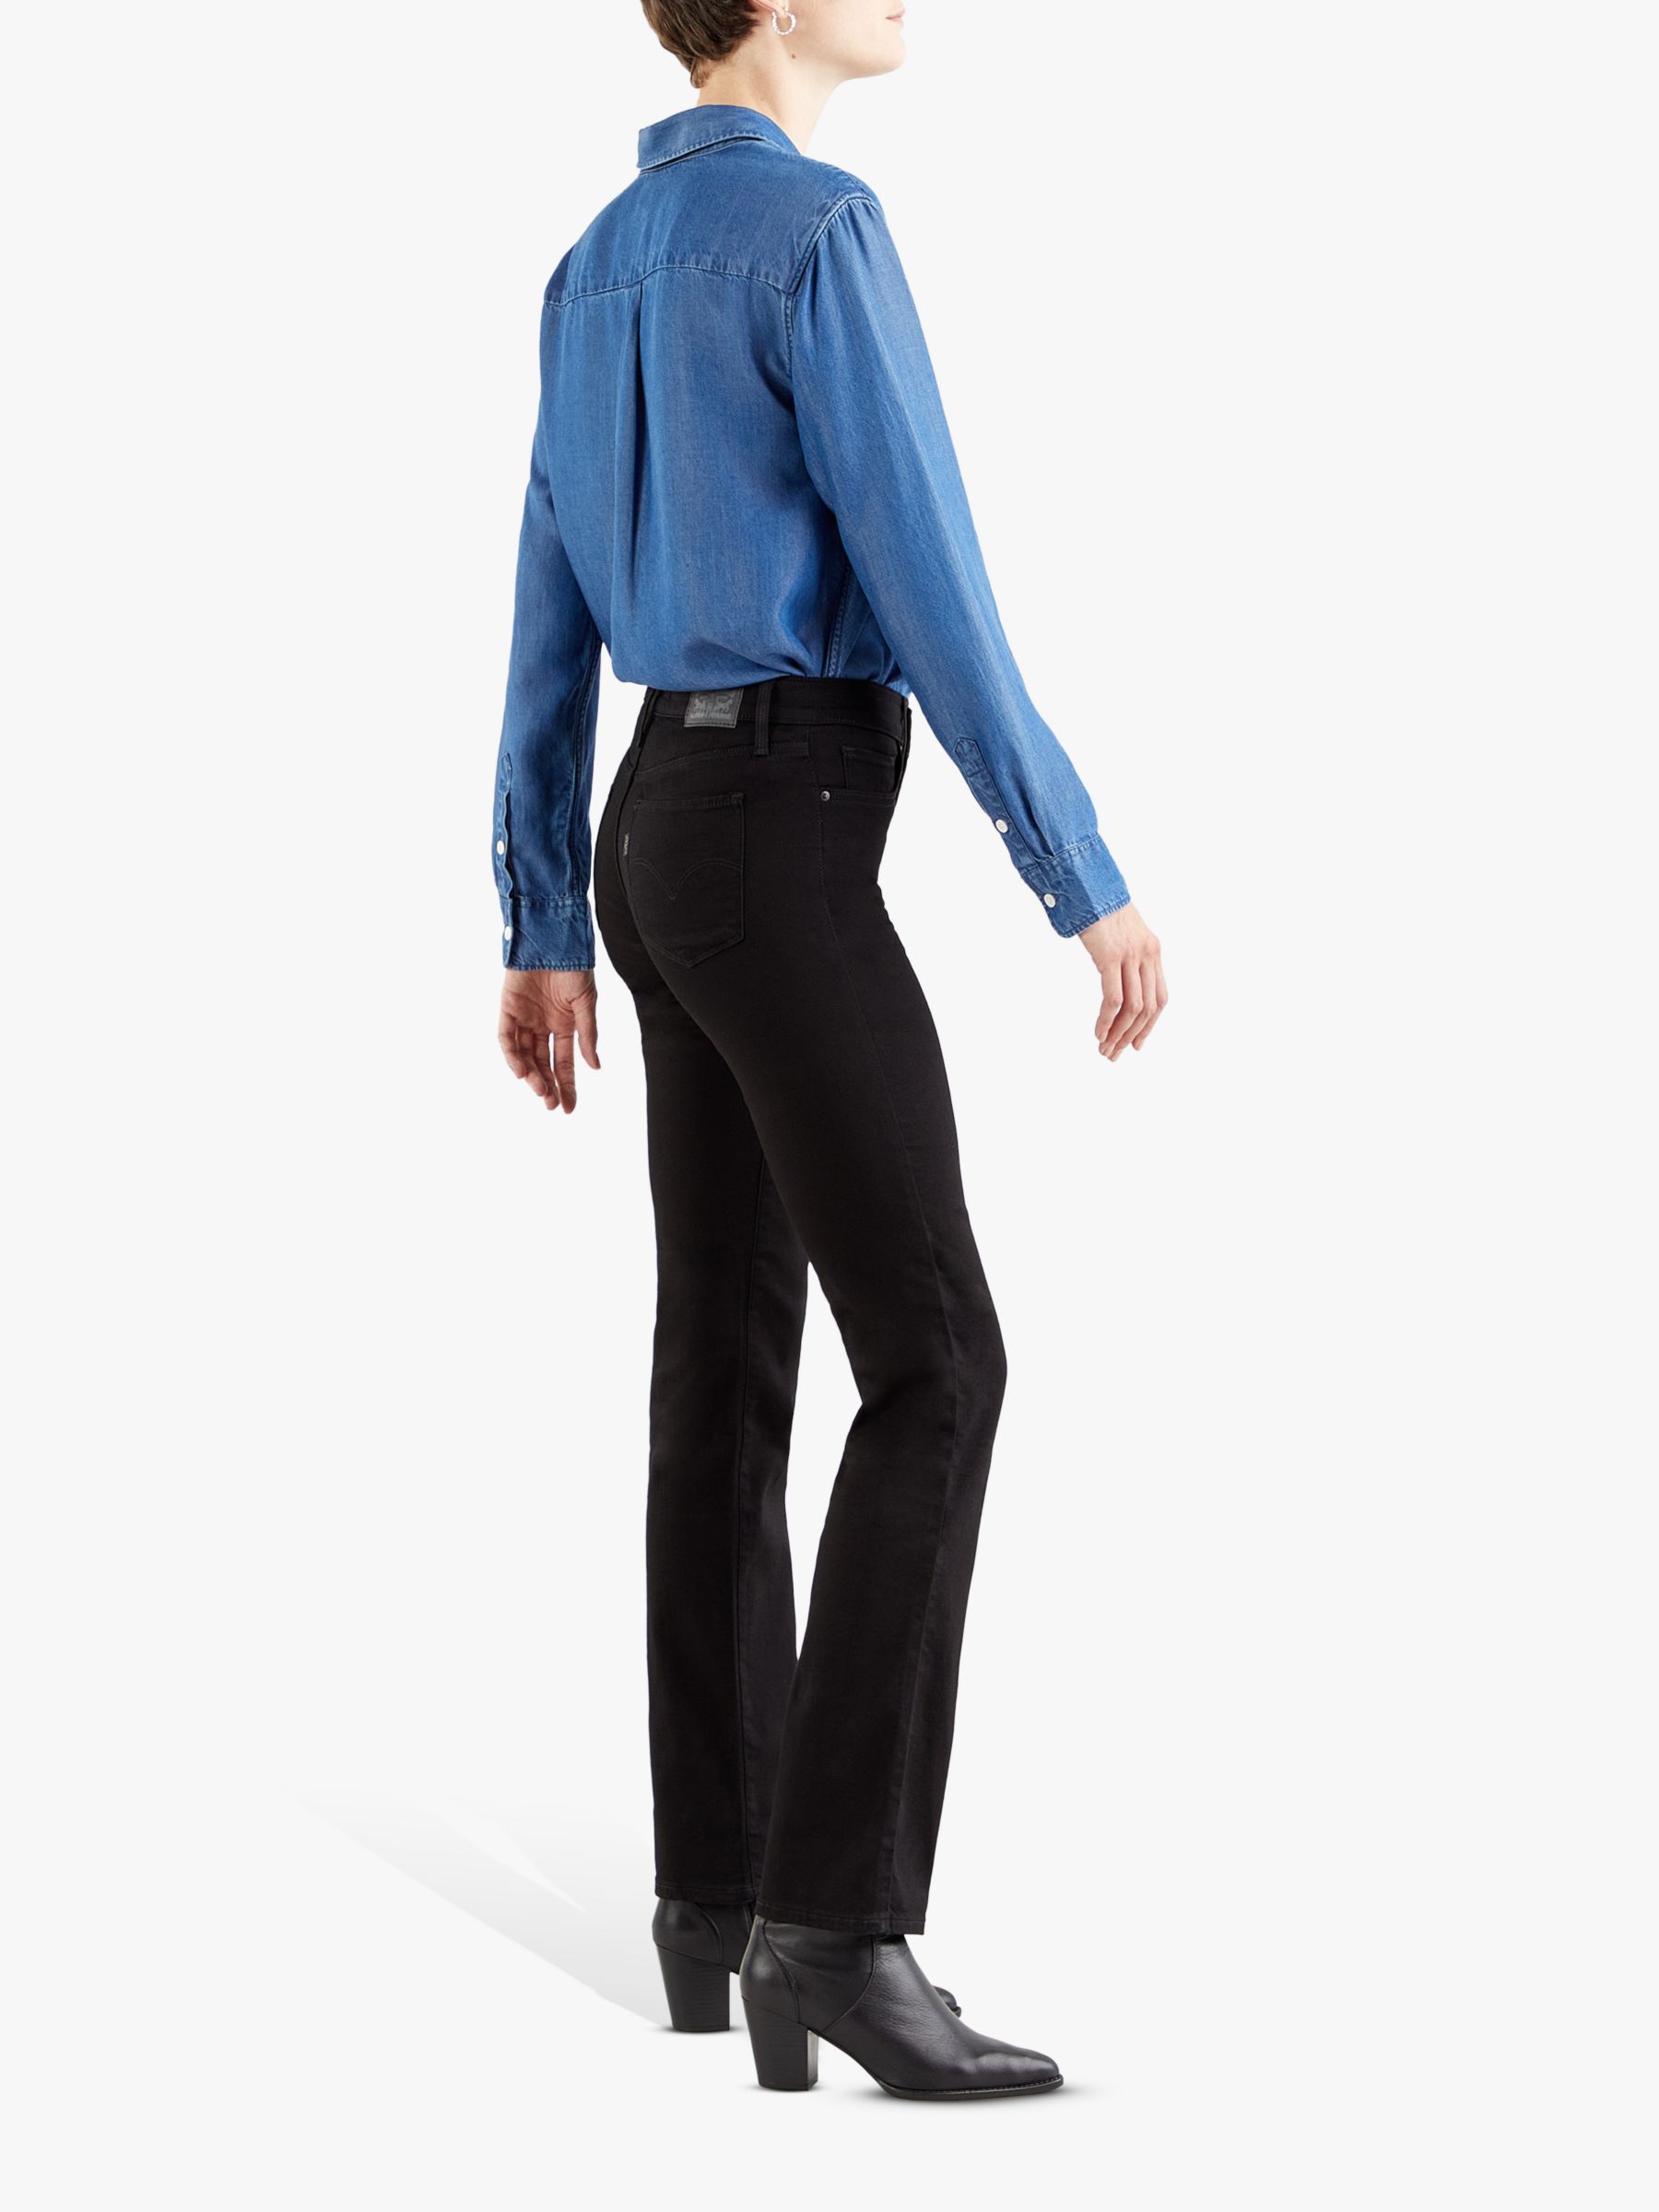 Buy Levi's 314 Shaping Straight Jeans, Soft Black Online at johnlewis.com